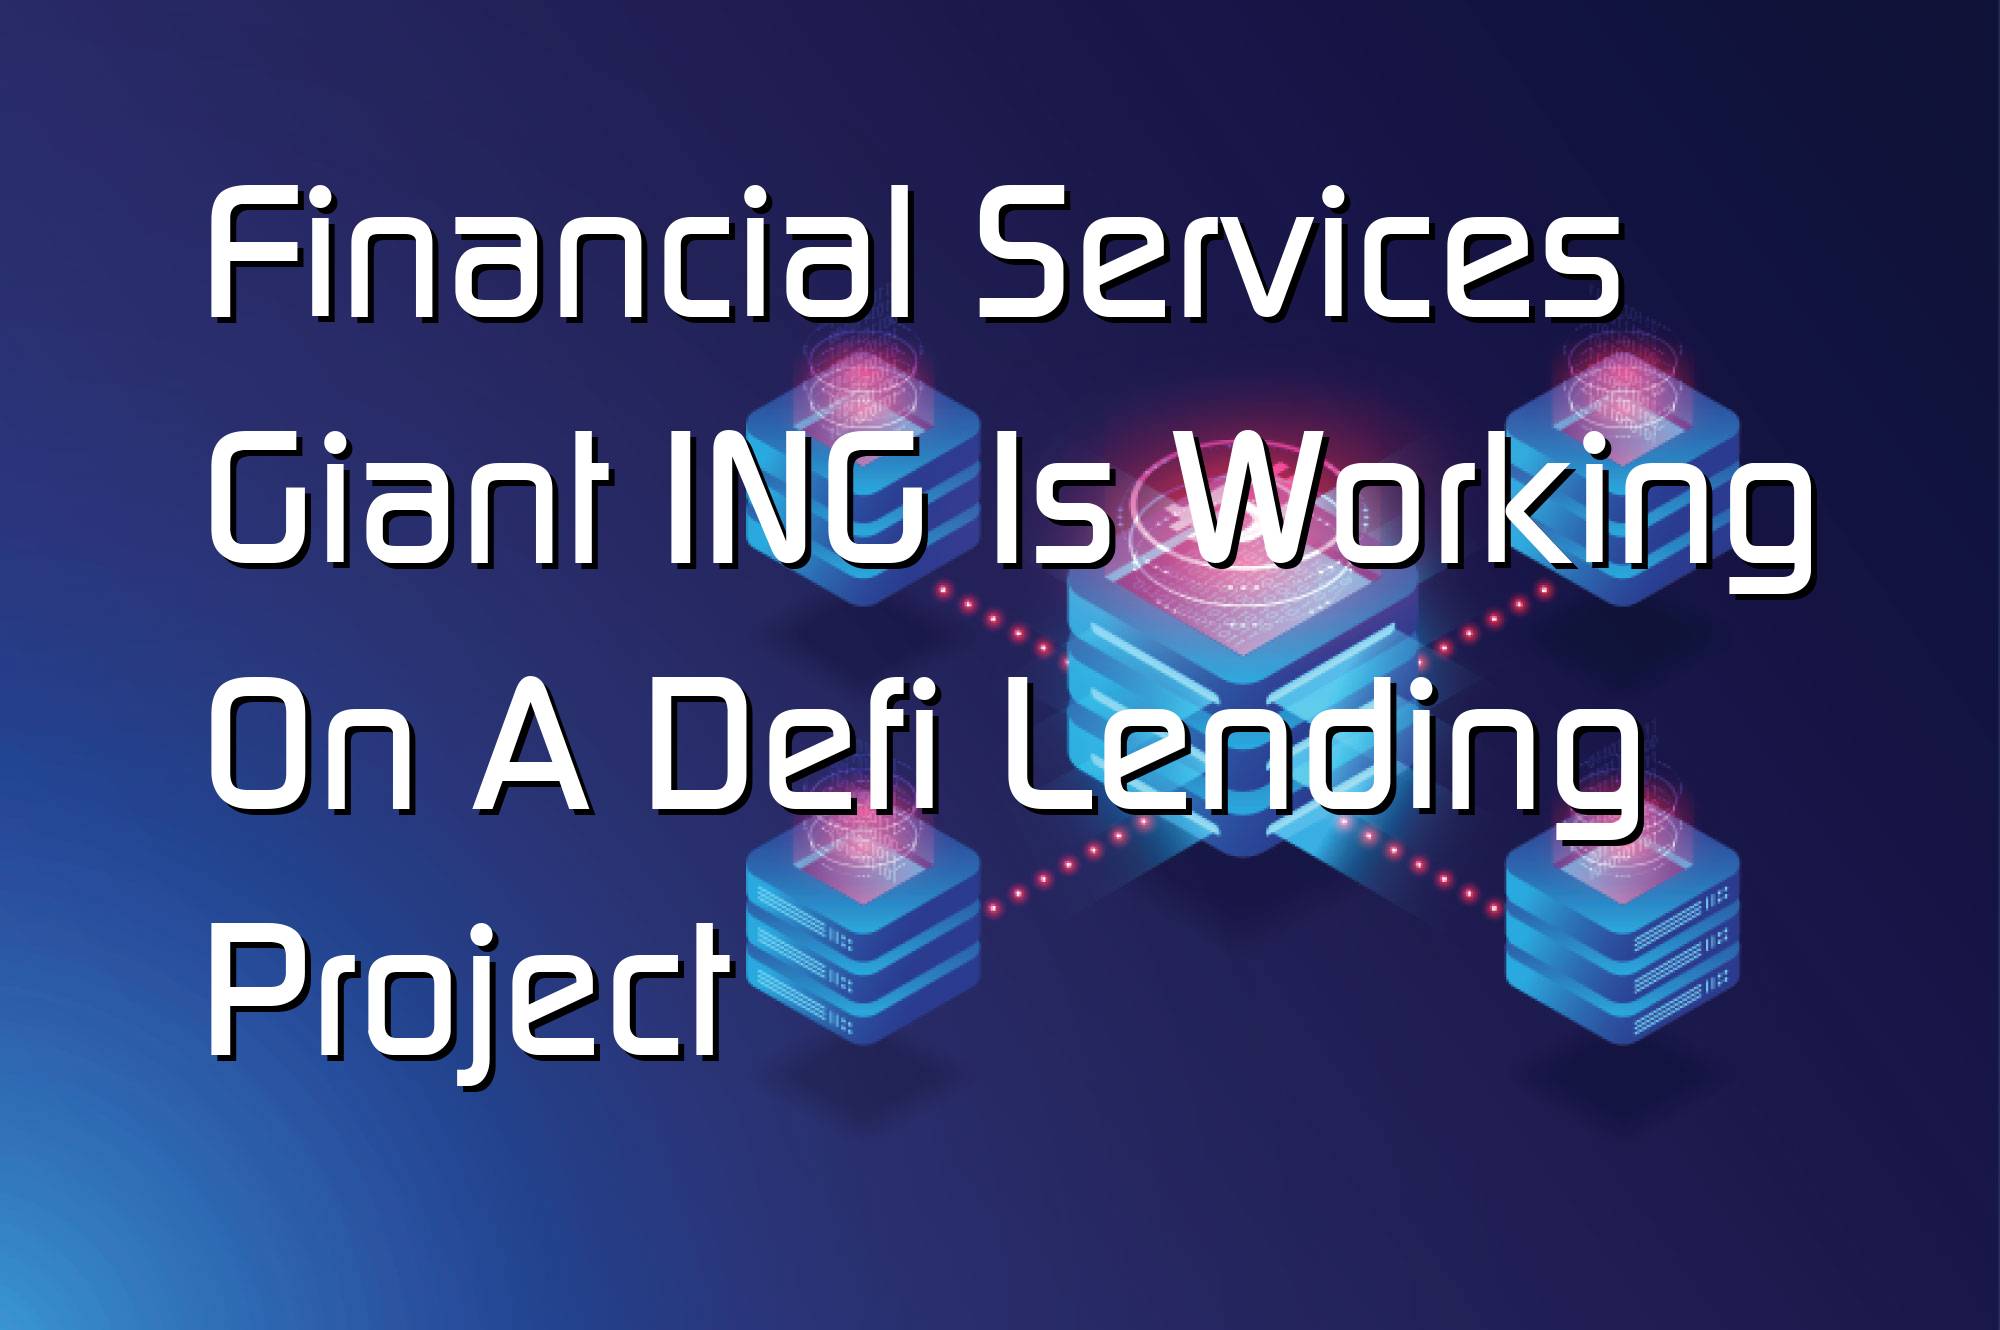 @$68321: Financial Services Giant ING Is Working On A Defi Lending Project